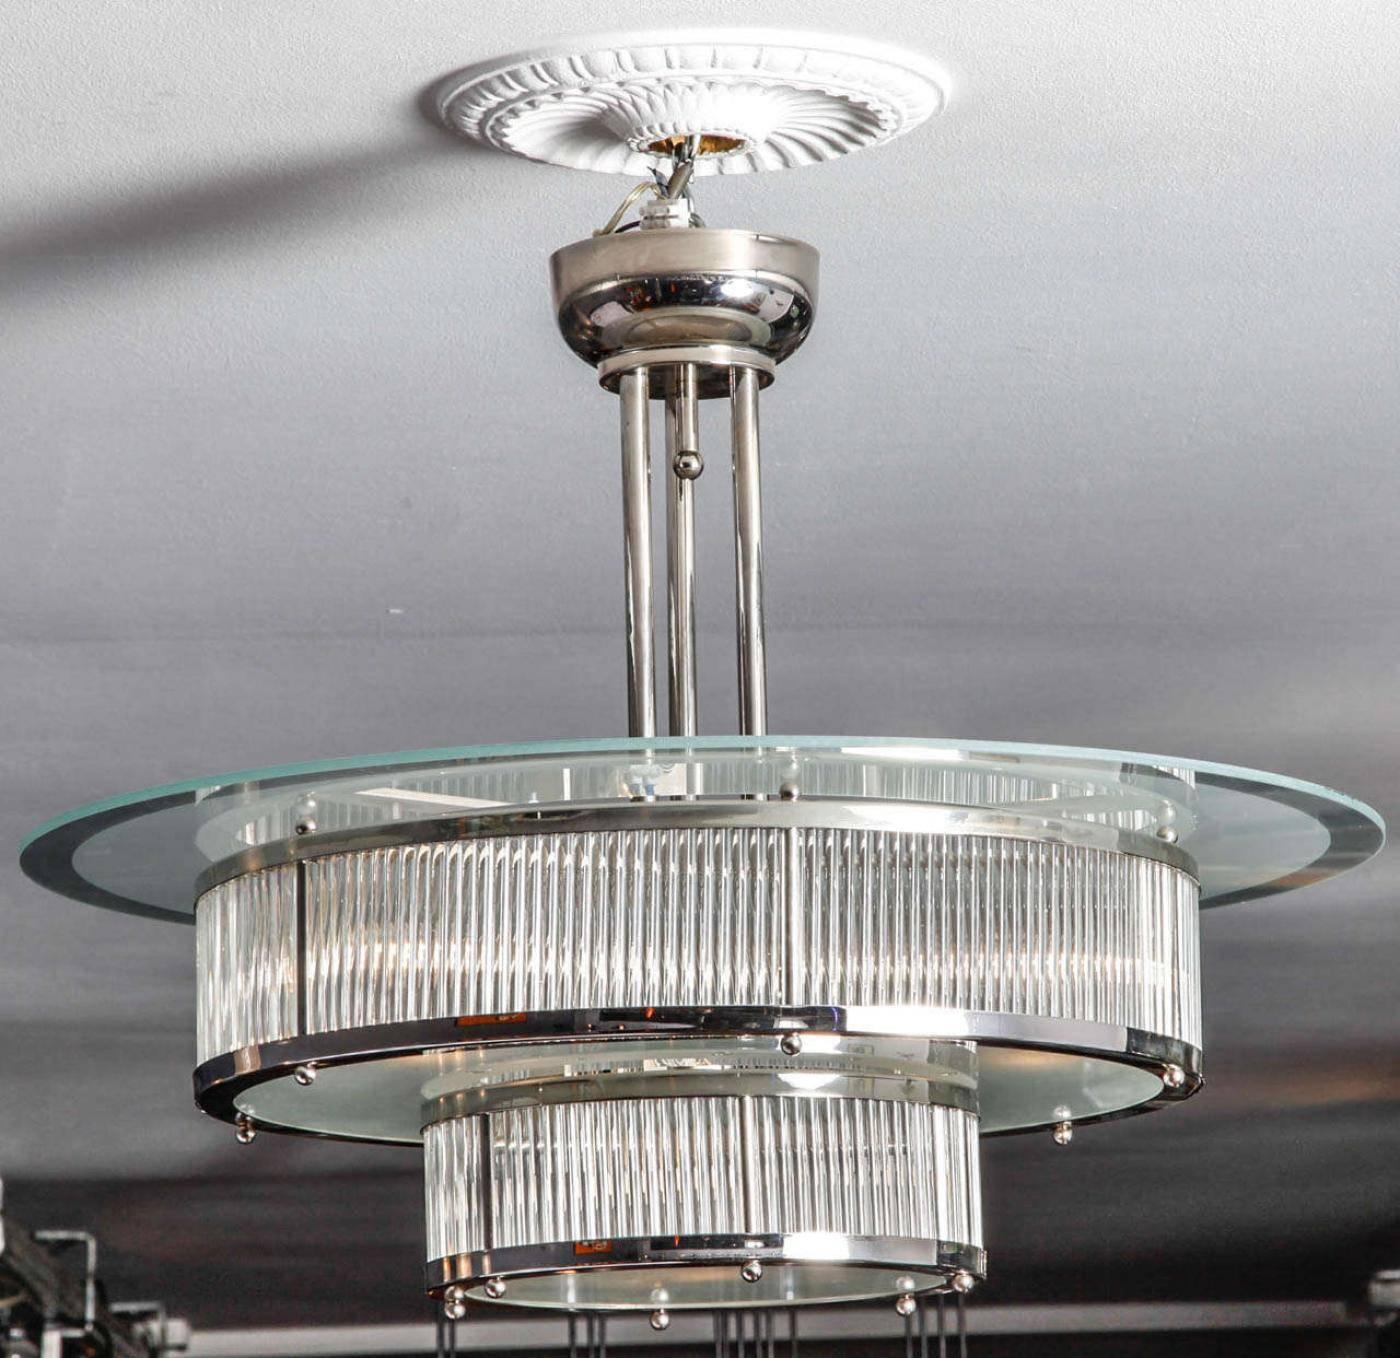 Art Deco chandelier designed by Atelier Petitot. Nickel-plated metal and glass.This model was designed in 1930 in France and was re edited in 2000. A beautiful modernist piece. Four electric bulbs in the bigger part and one in the middel underneath.